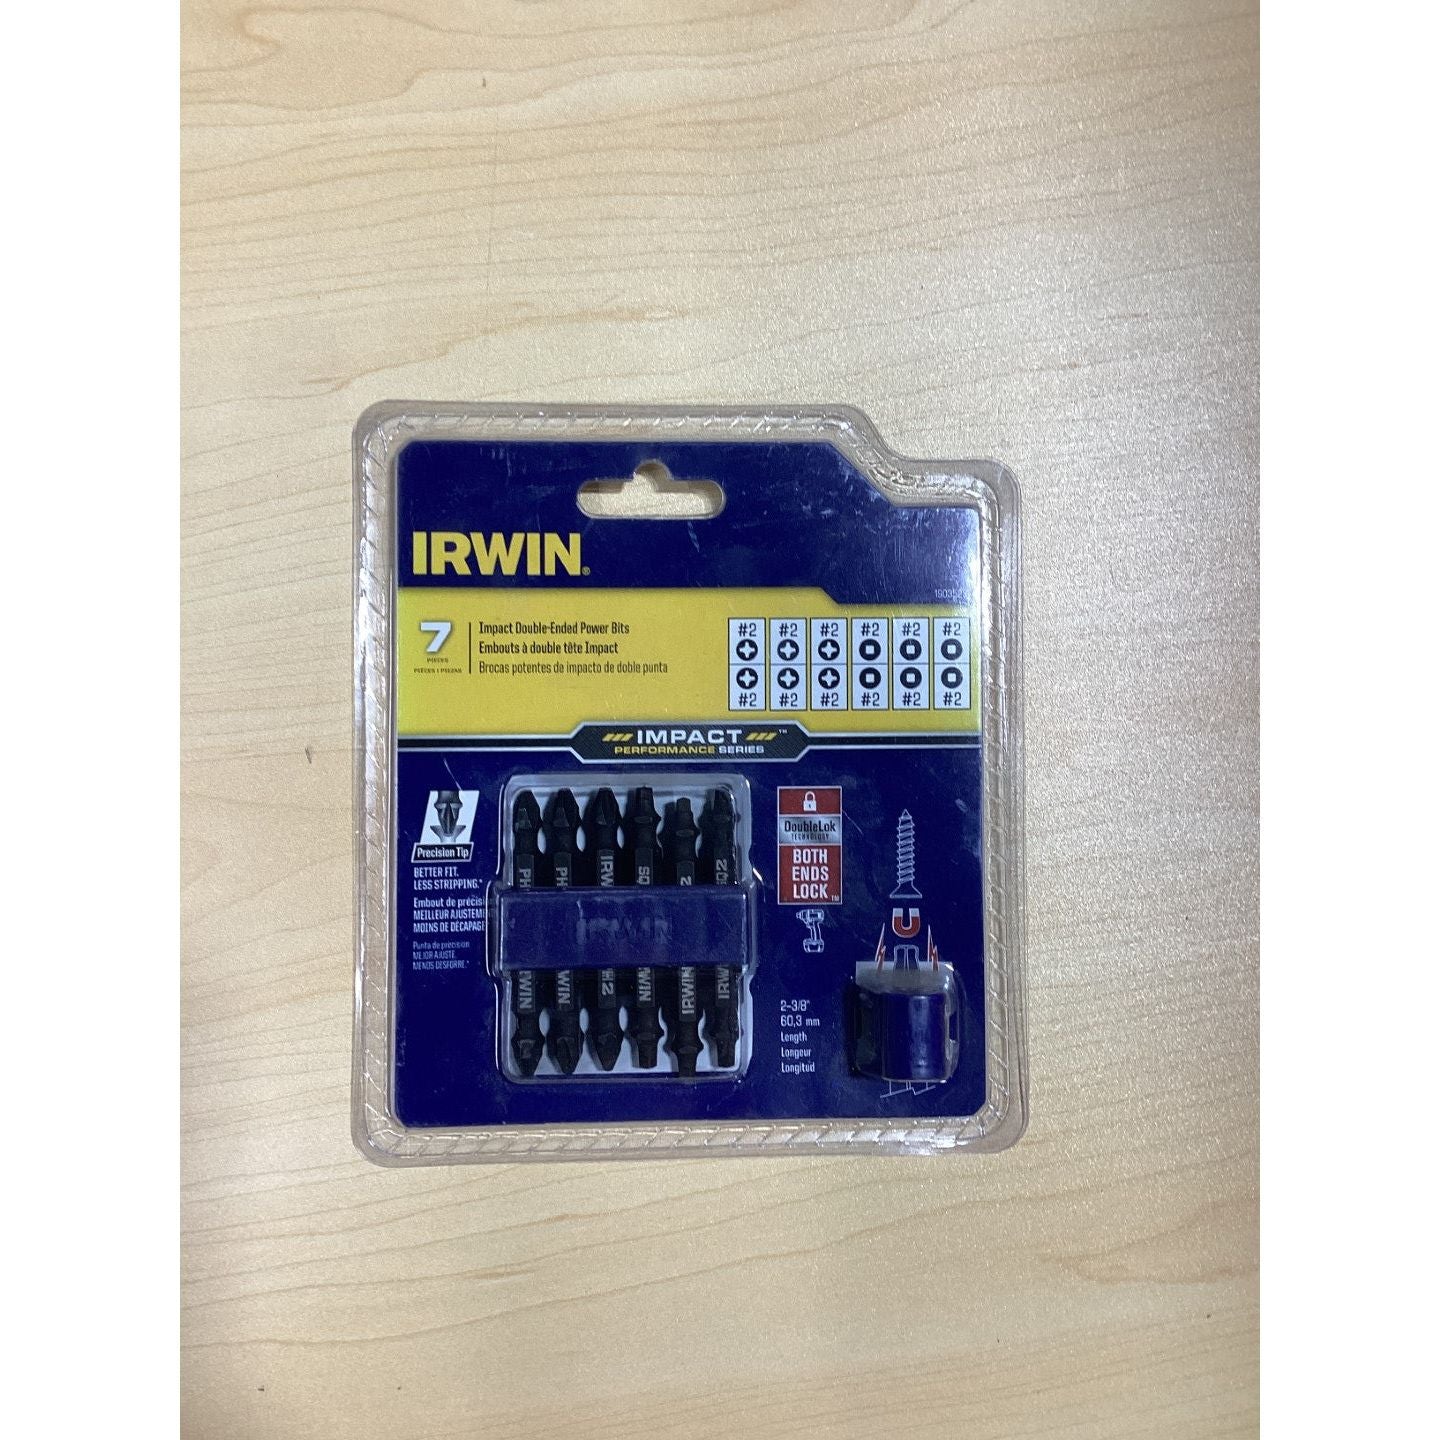 Irwin 7 piece Impact double-ended power bits set